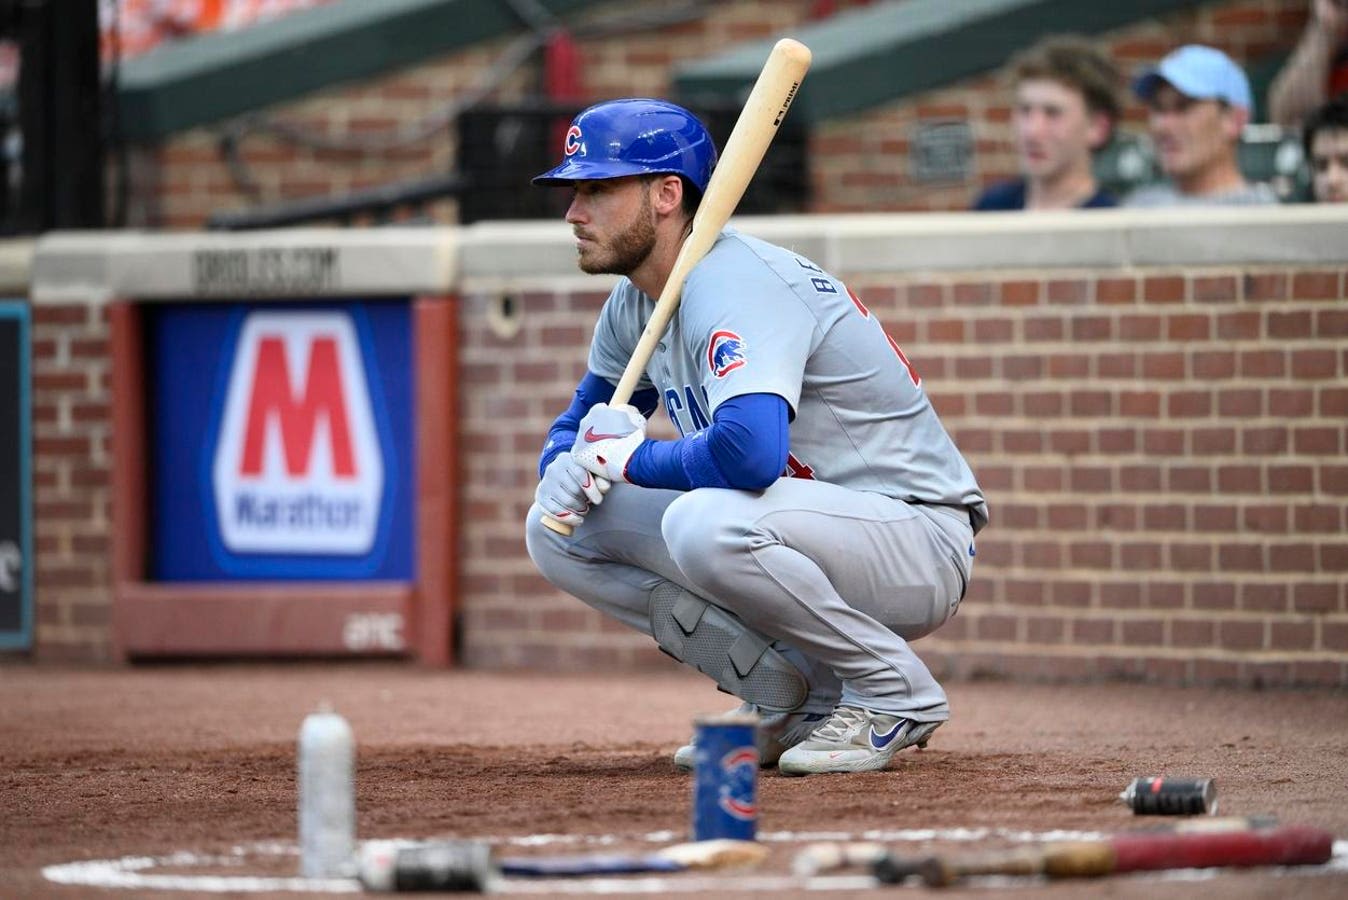 The Chicago Cubs’ Roster Doesn’t Fit Their Trade Deadline Objective